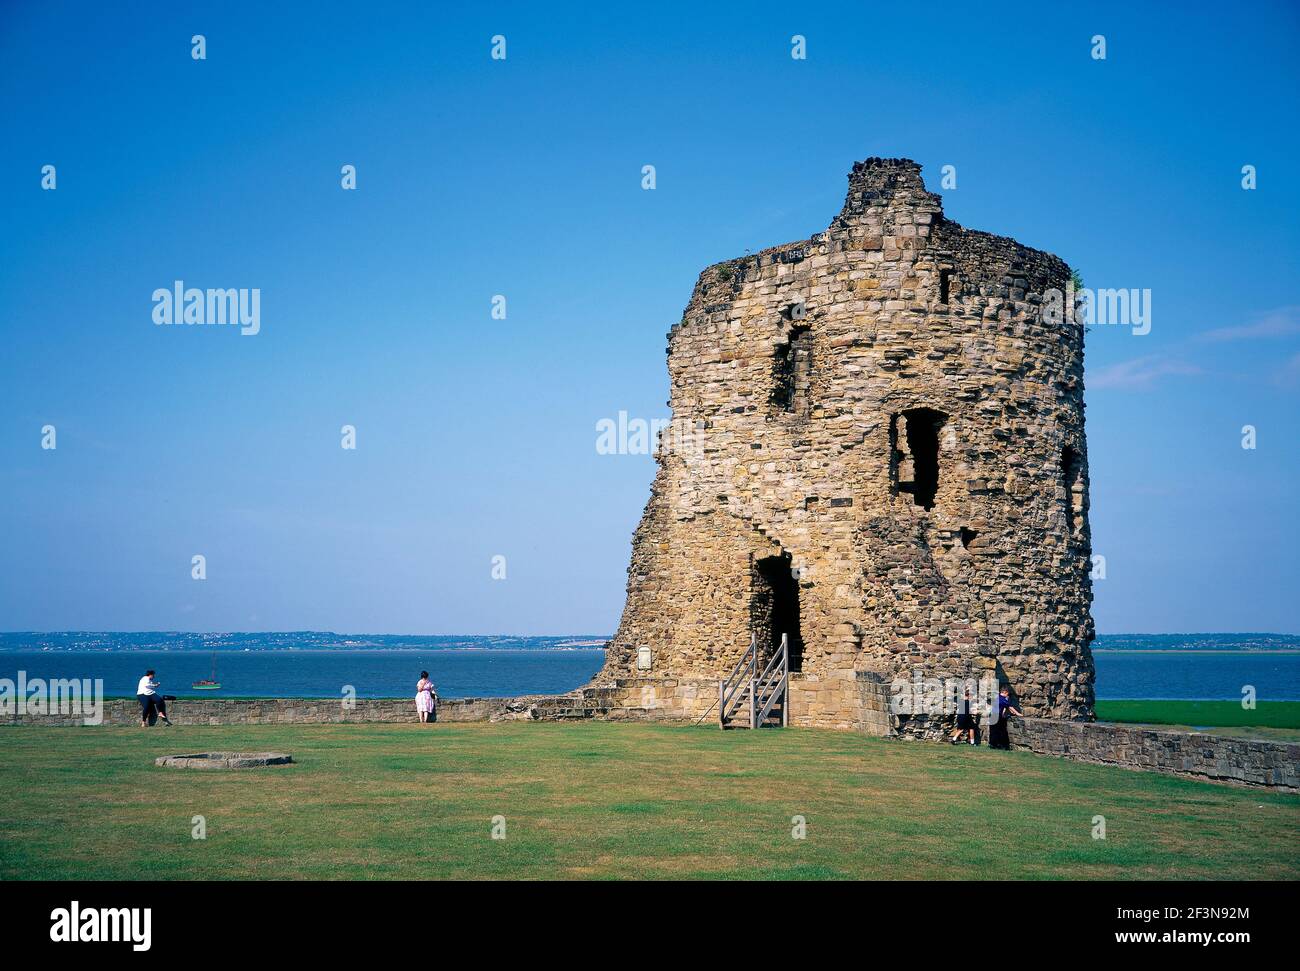 Flint Castle. Crumbling remains of old North East stone tower. Sea in background. Boat. People. Flintshire.   returned 1,5,07. Stock Photo